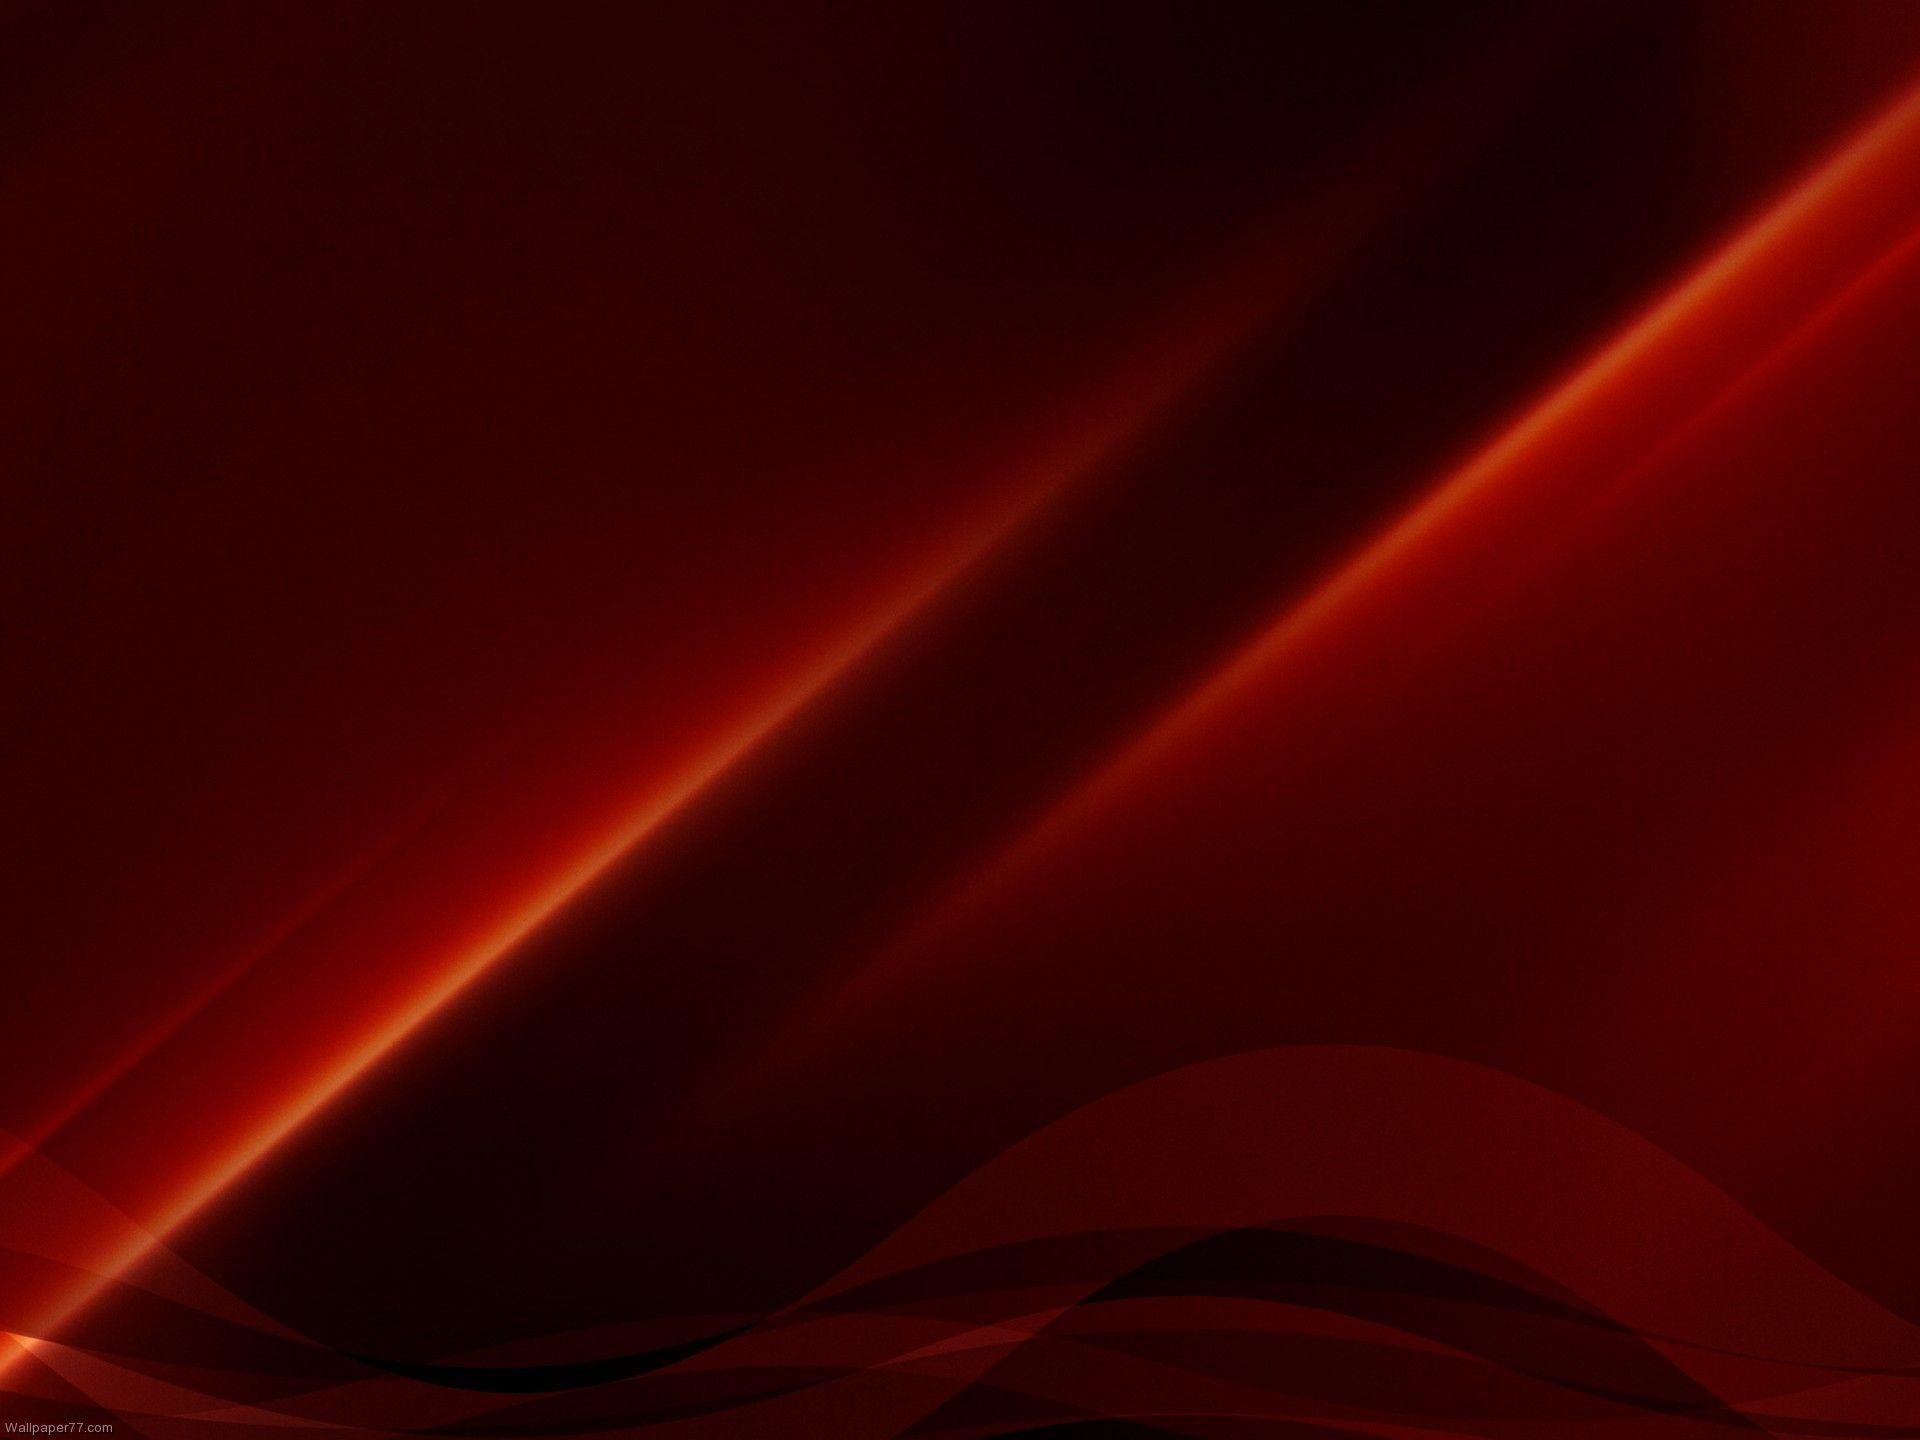 1920x1440 Dark Red Abstract Backgrounds Hd Background 9 HD Wallpapers